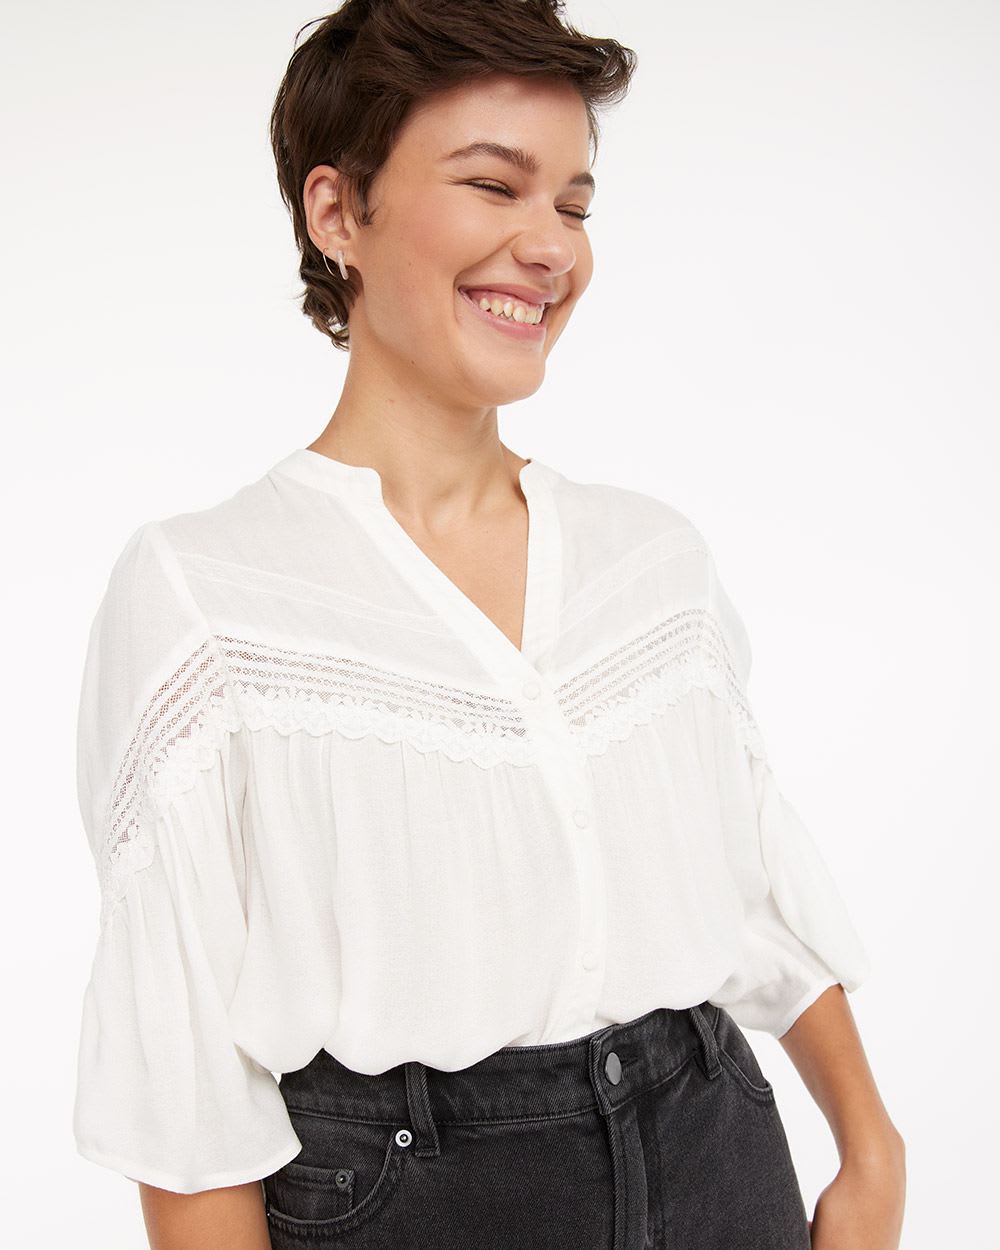 Solid Split-Neck Blouse with Lace Inserts